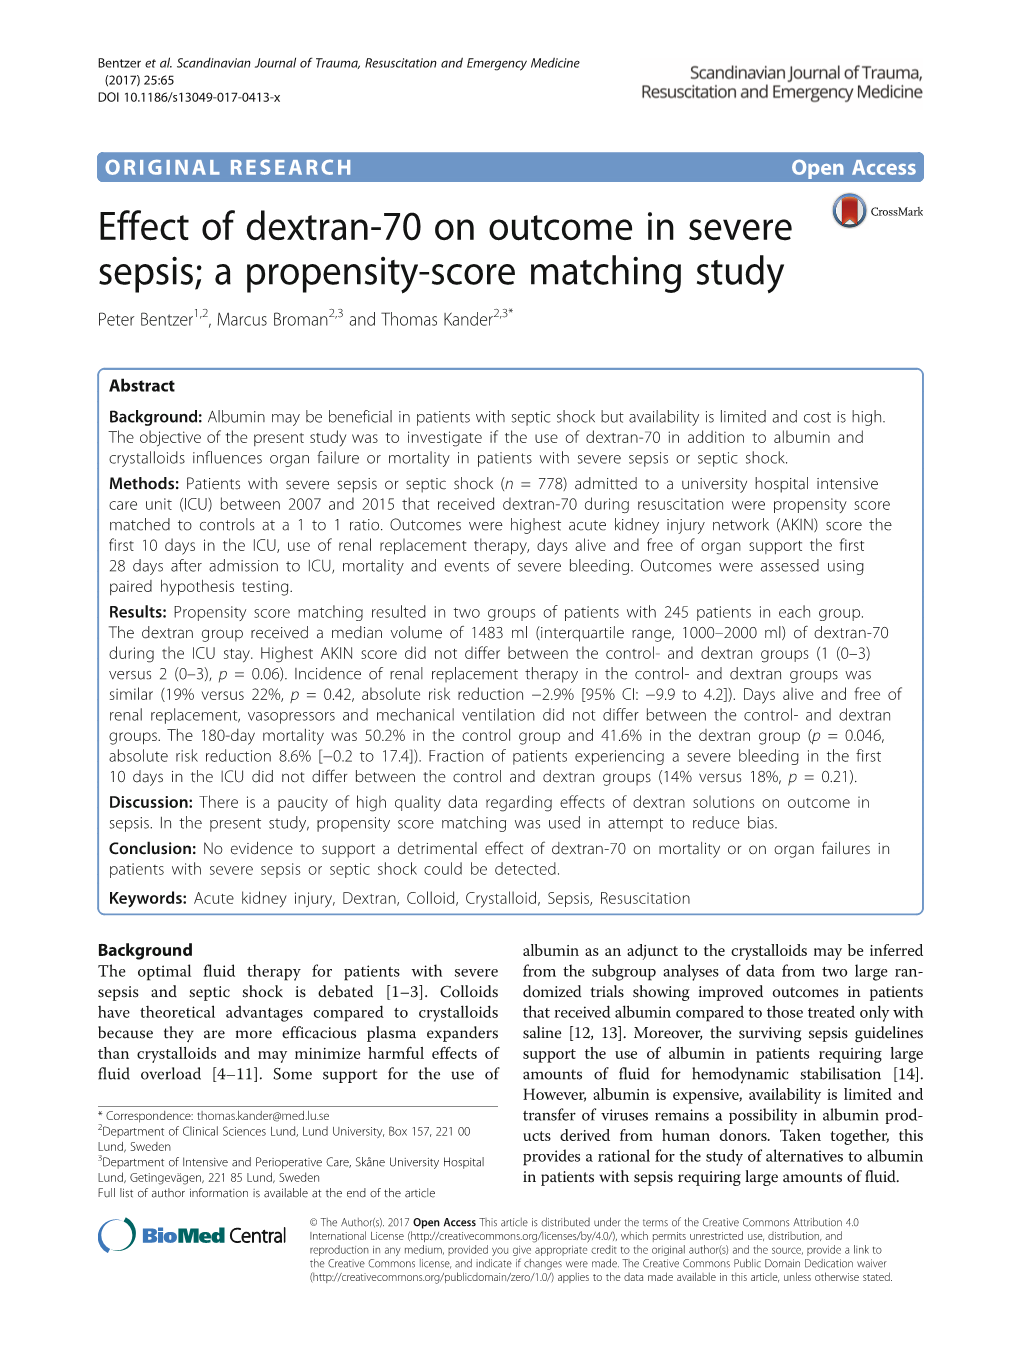 Effect of Dextran-70 on Outcome in Severe Sepsis; a Propensity-Score Matching Study Peter Bentzer1,2, Marcus Broman2,3 and Thomas Kander2,3*